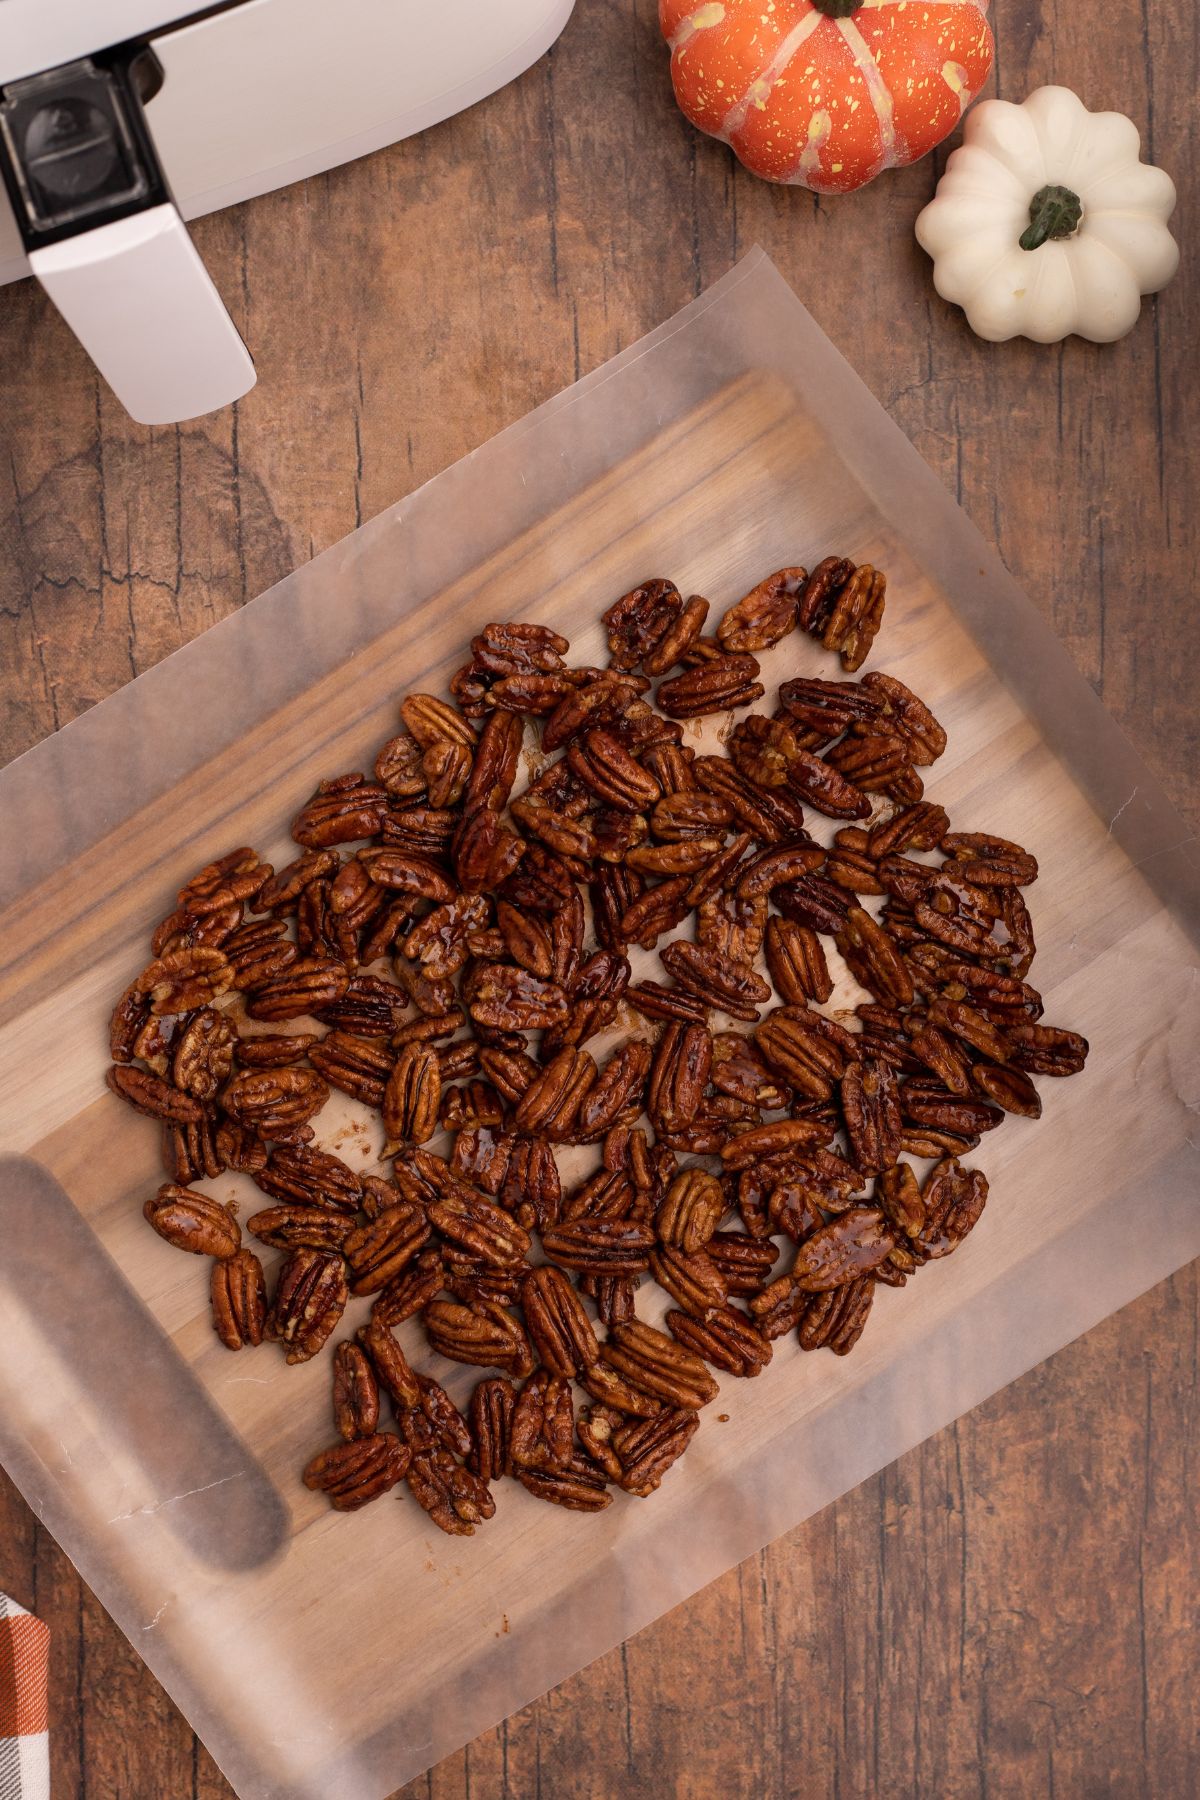 Pecans spread out on wax paper to dry out and cool